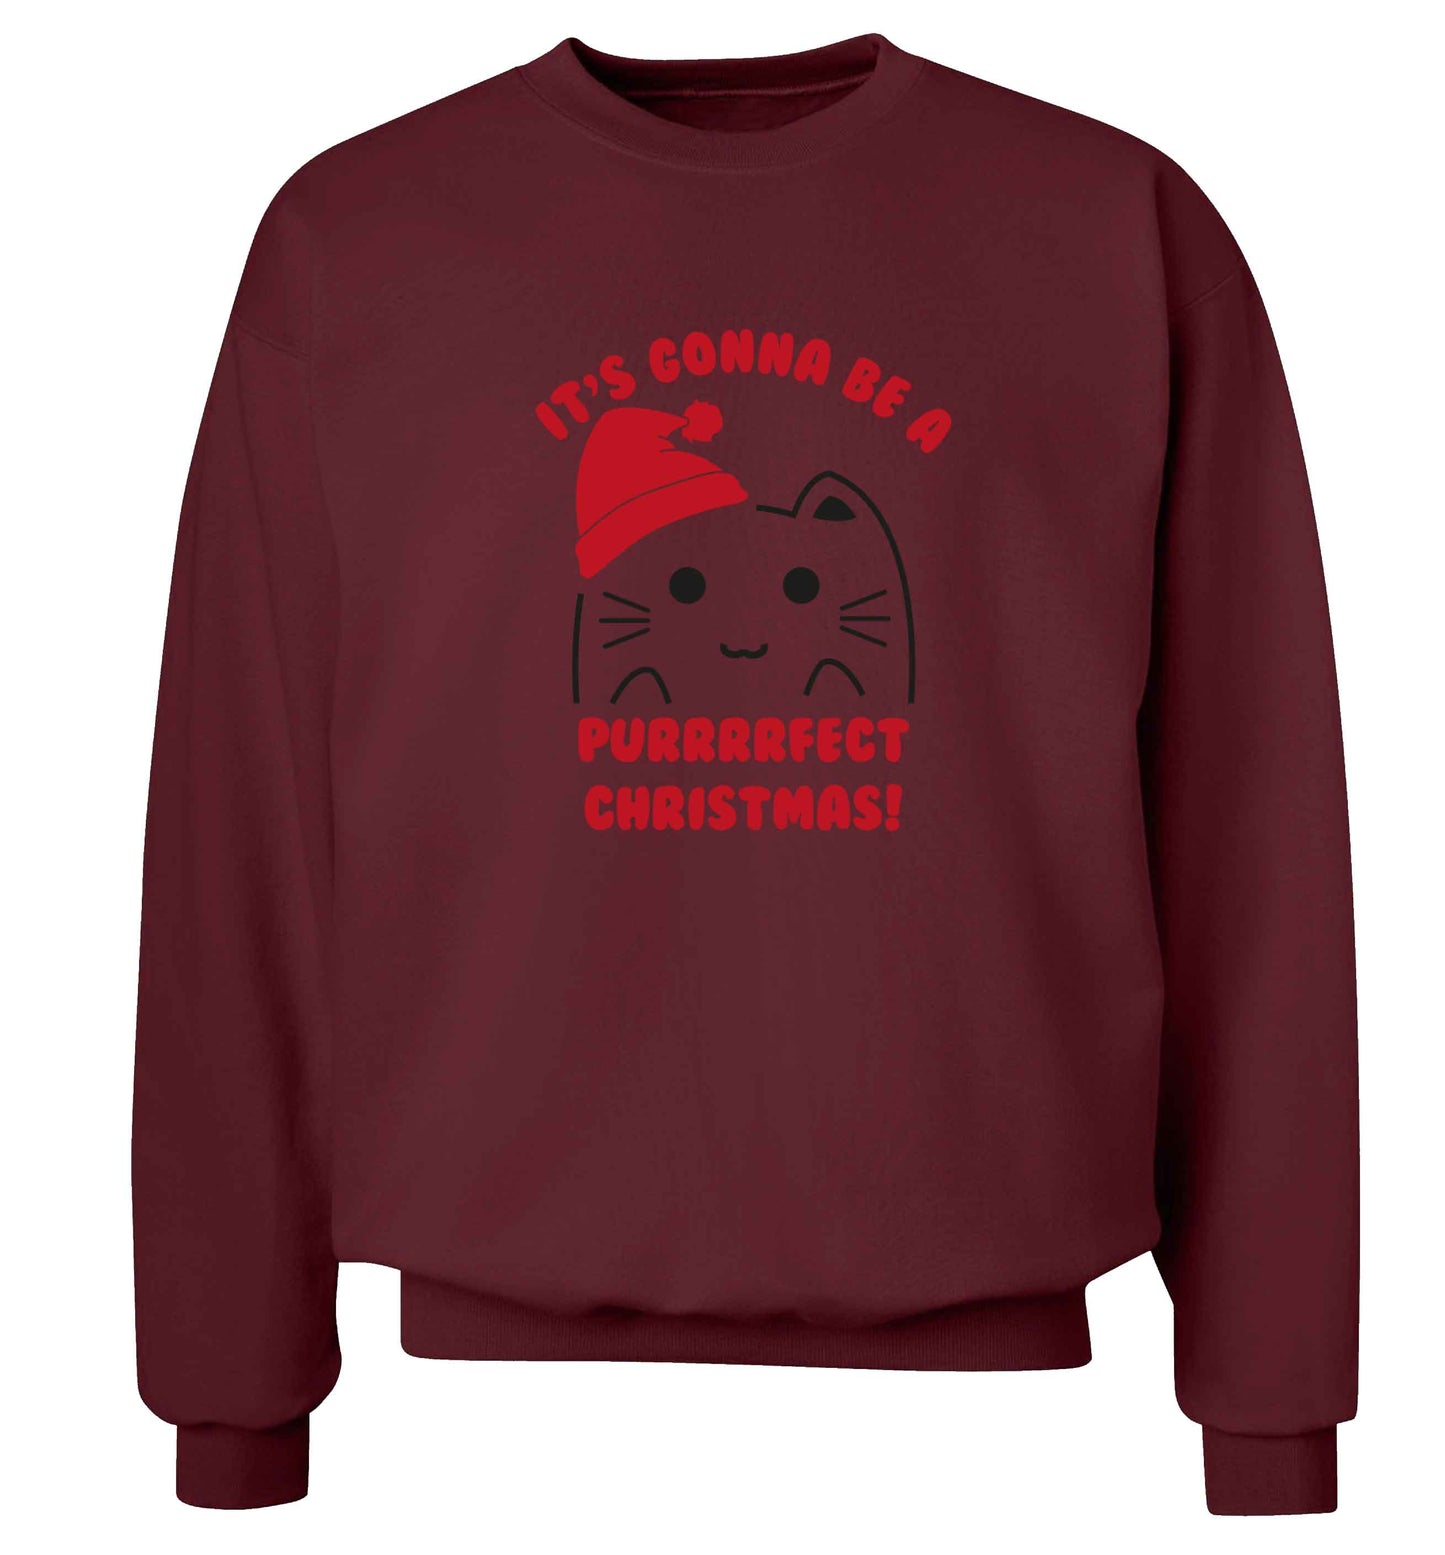 It's going to be a purrfect Christmas adult's unisex maroon sweater 2XL